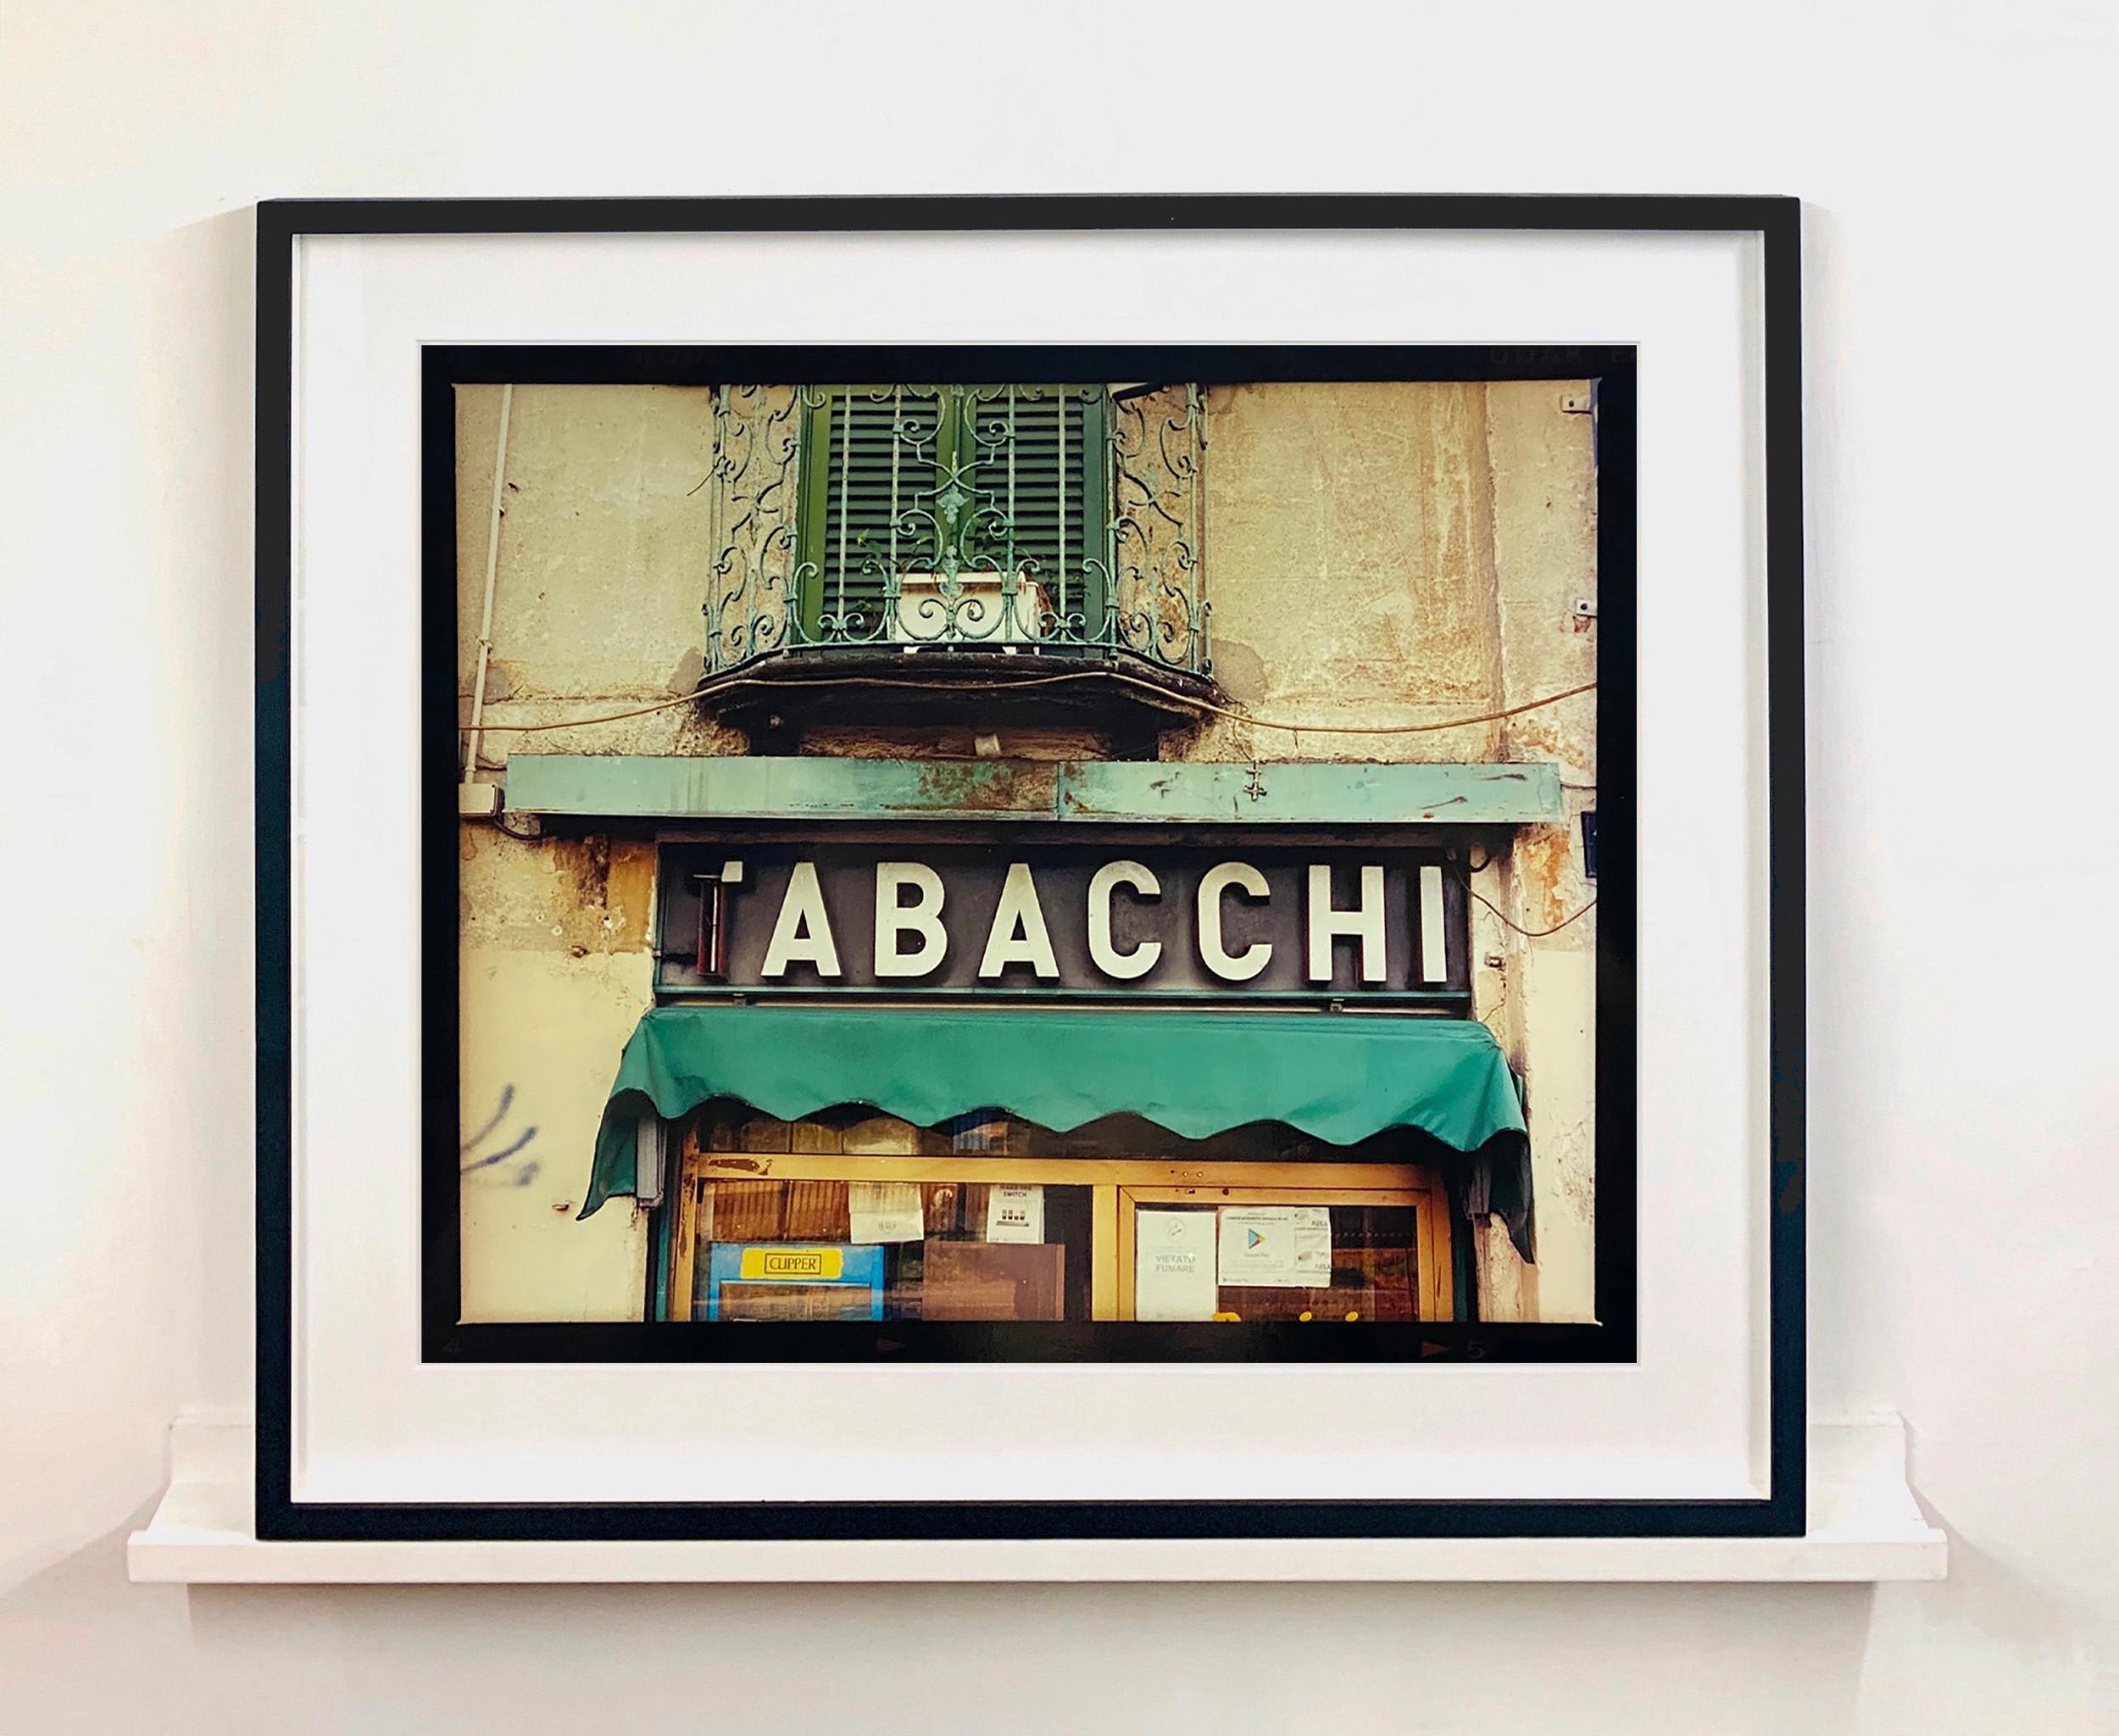 TABACCHI Sign, from Richard Heeps series, 'A Short History of Milan'.

A Short History of Milan began in November 2018 for a special project featuring at the Affordable Art Fair Milan 2019 and the series is ongoing.
There is a reoccurring linear,